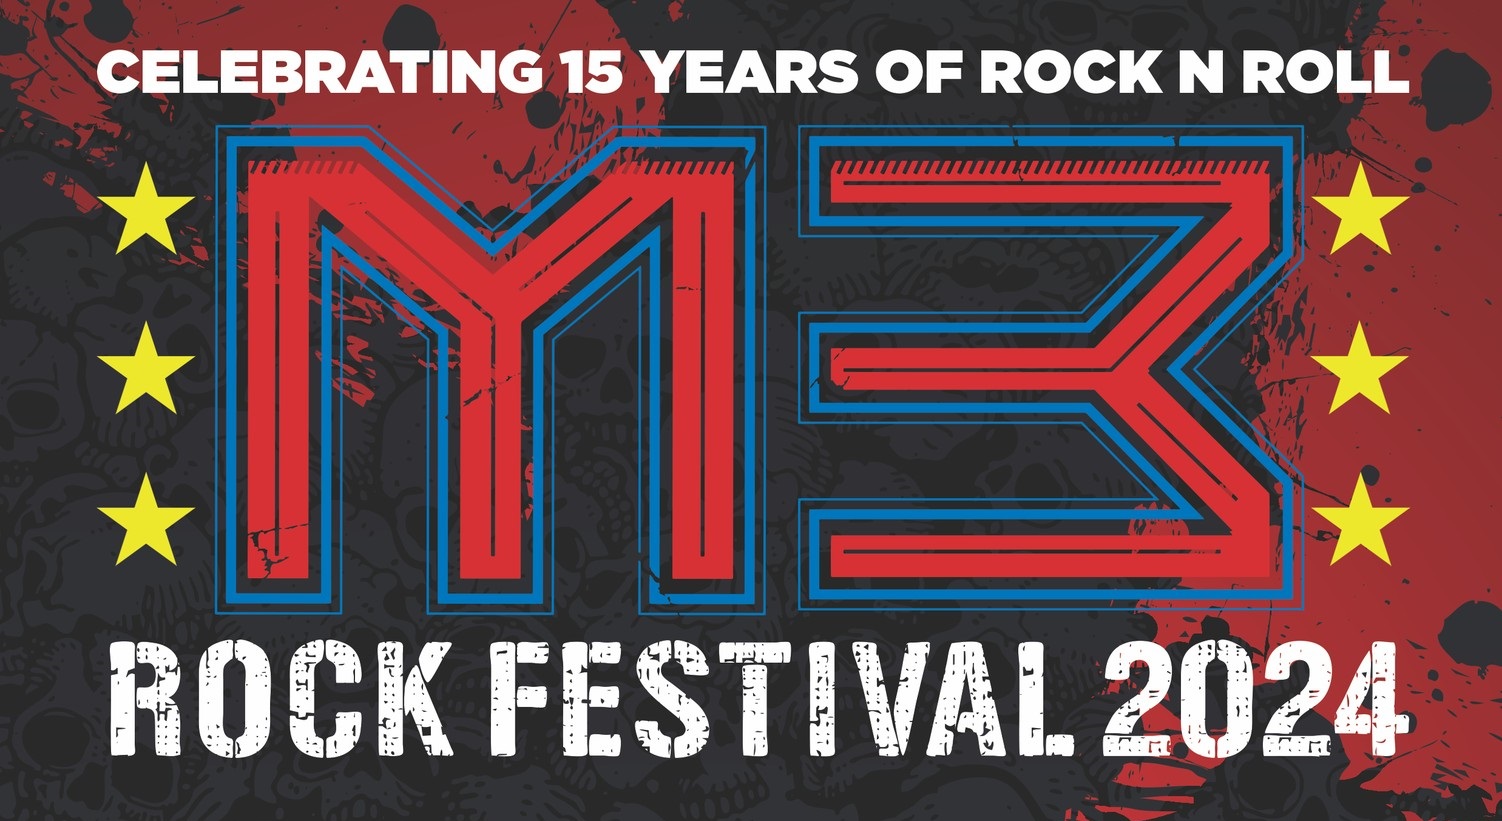 Stephen Pearcy, Bret Michaels, Queensryche, Stryper and more to Headline The 2024 M3 Festival